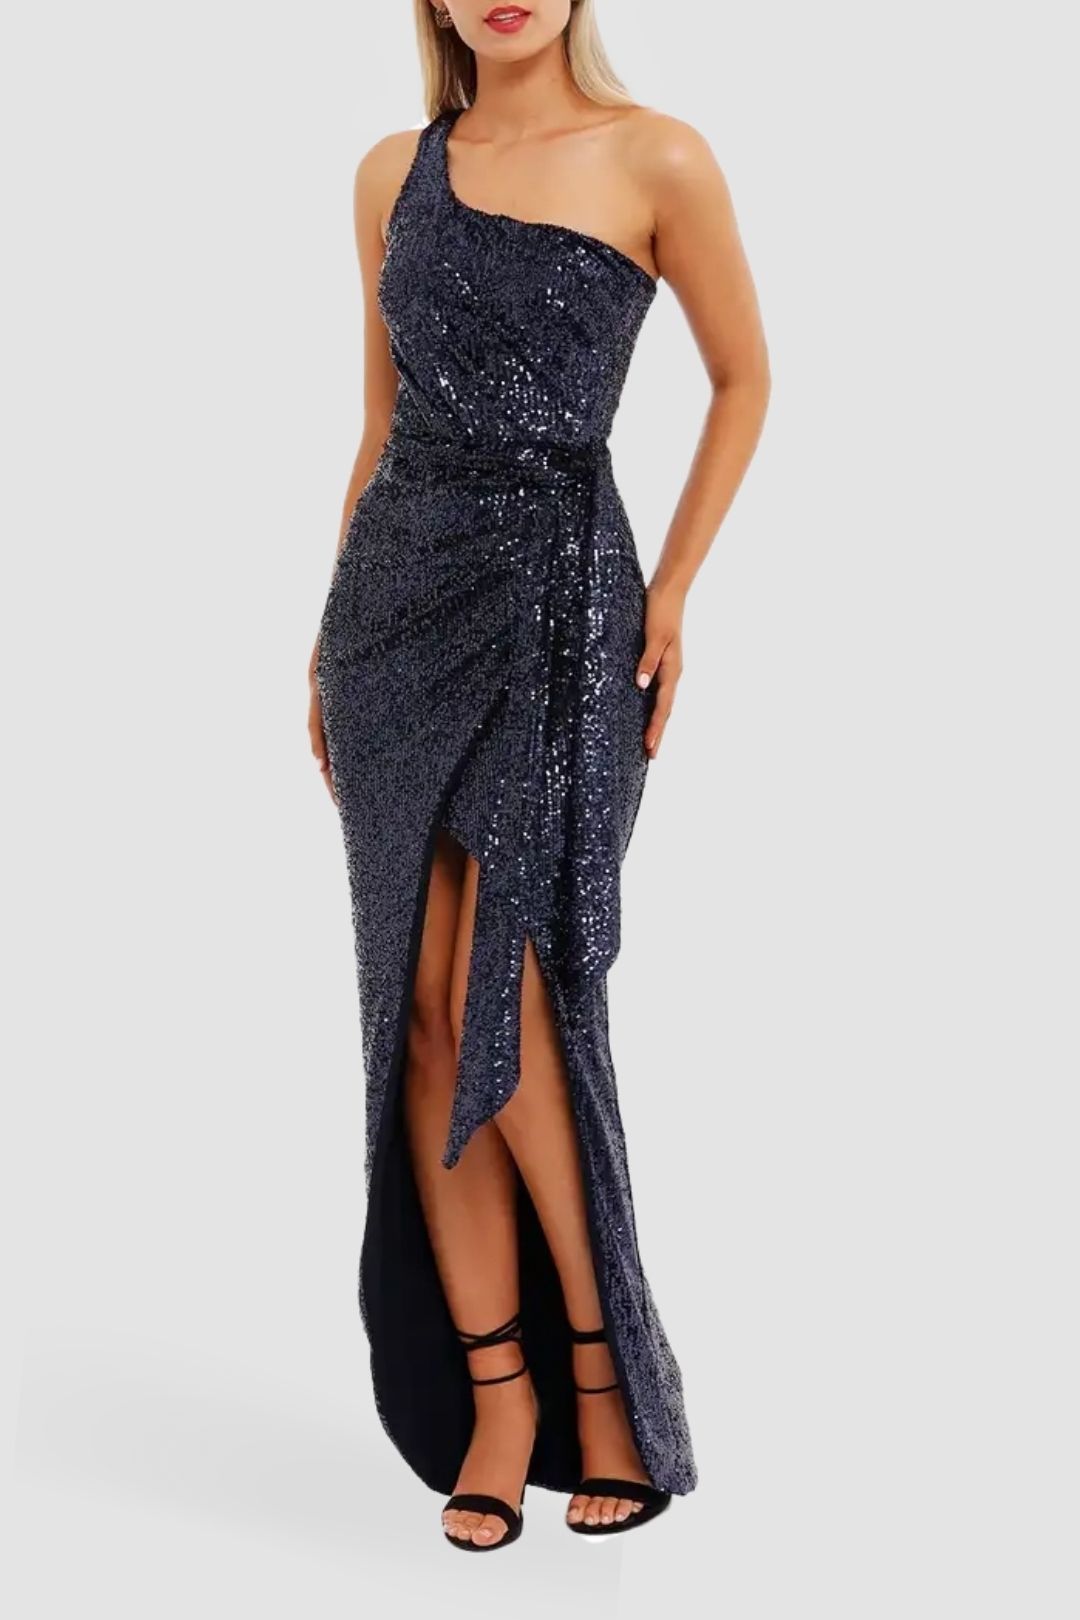 Nookie Palazzo Gown Navy High Slit Skirt